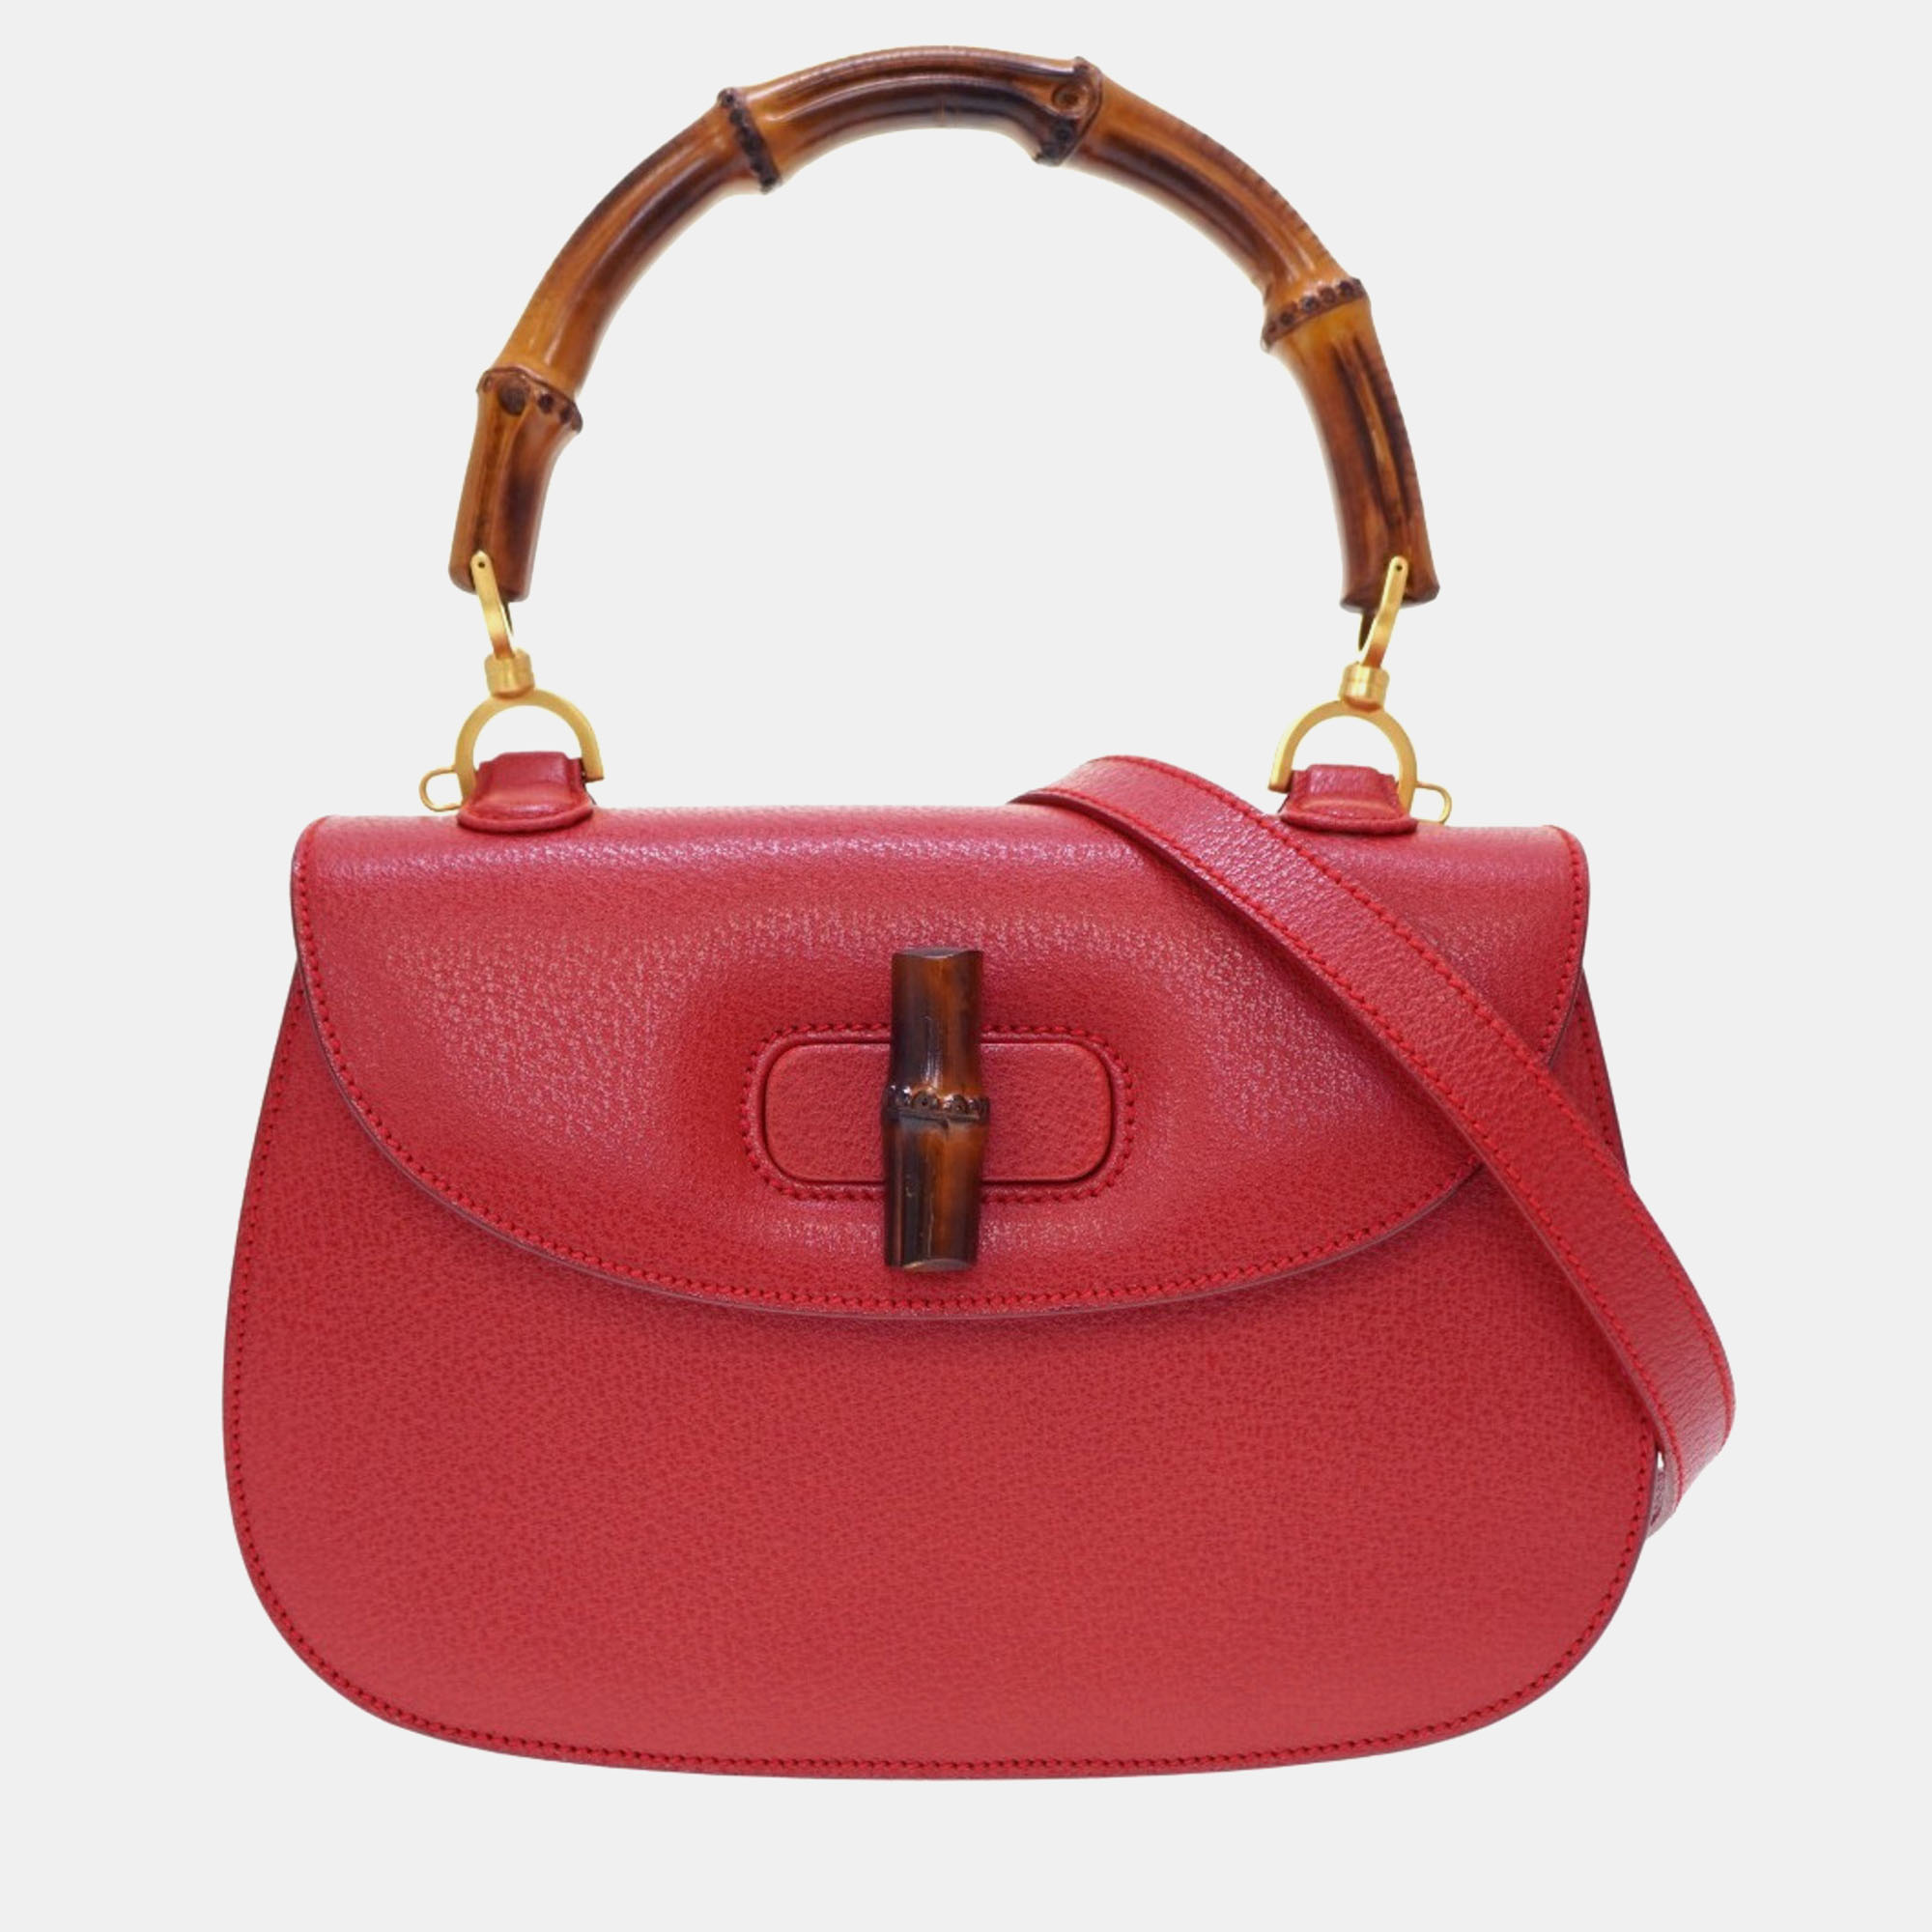 Gucci red leather bamboo 1947 top handle bag